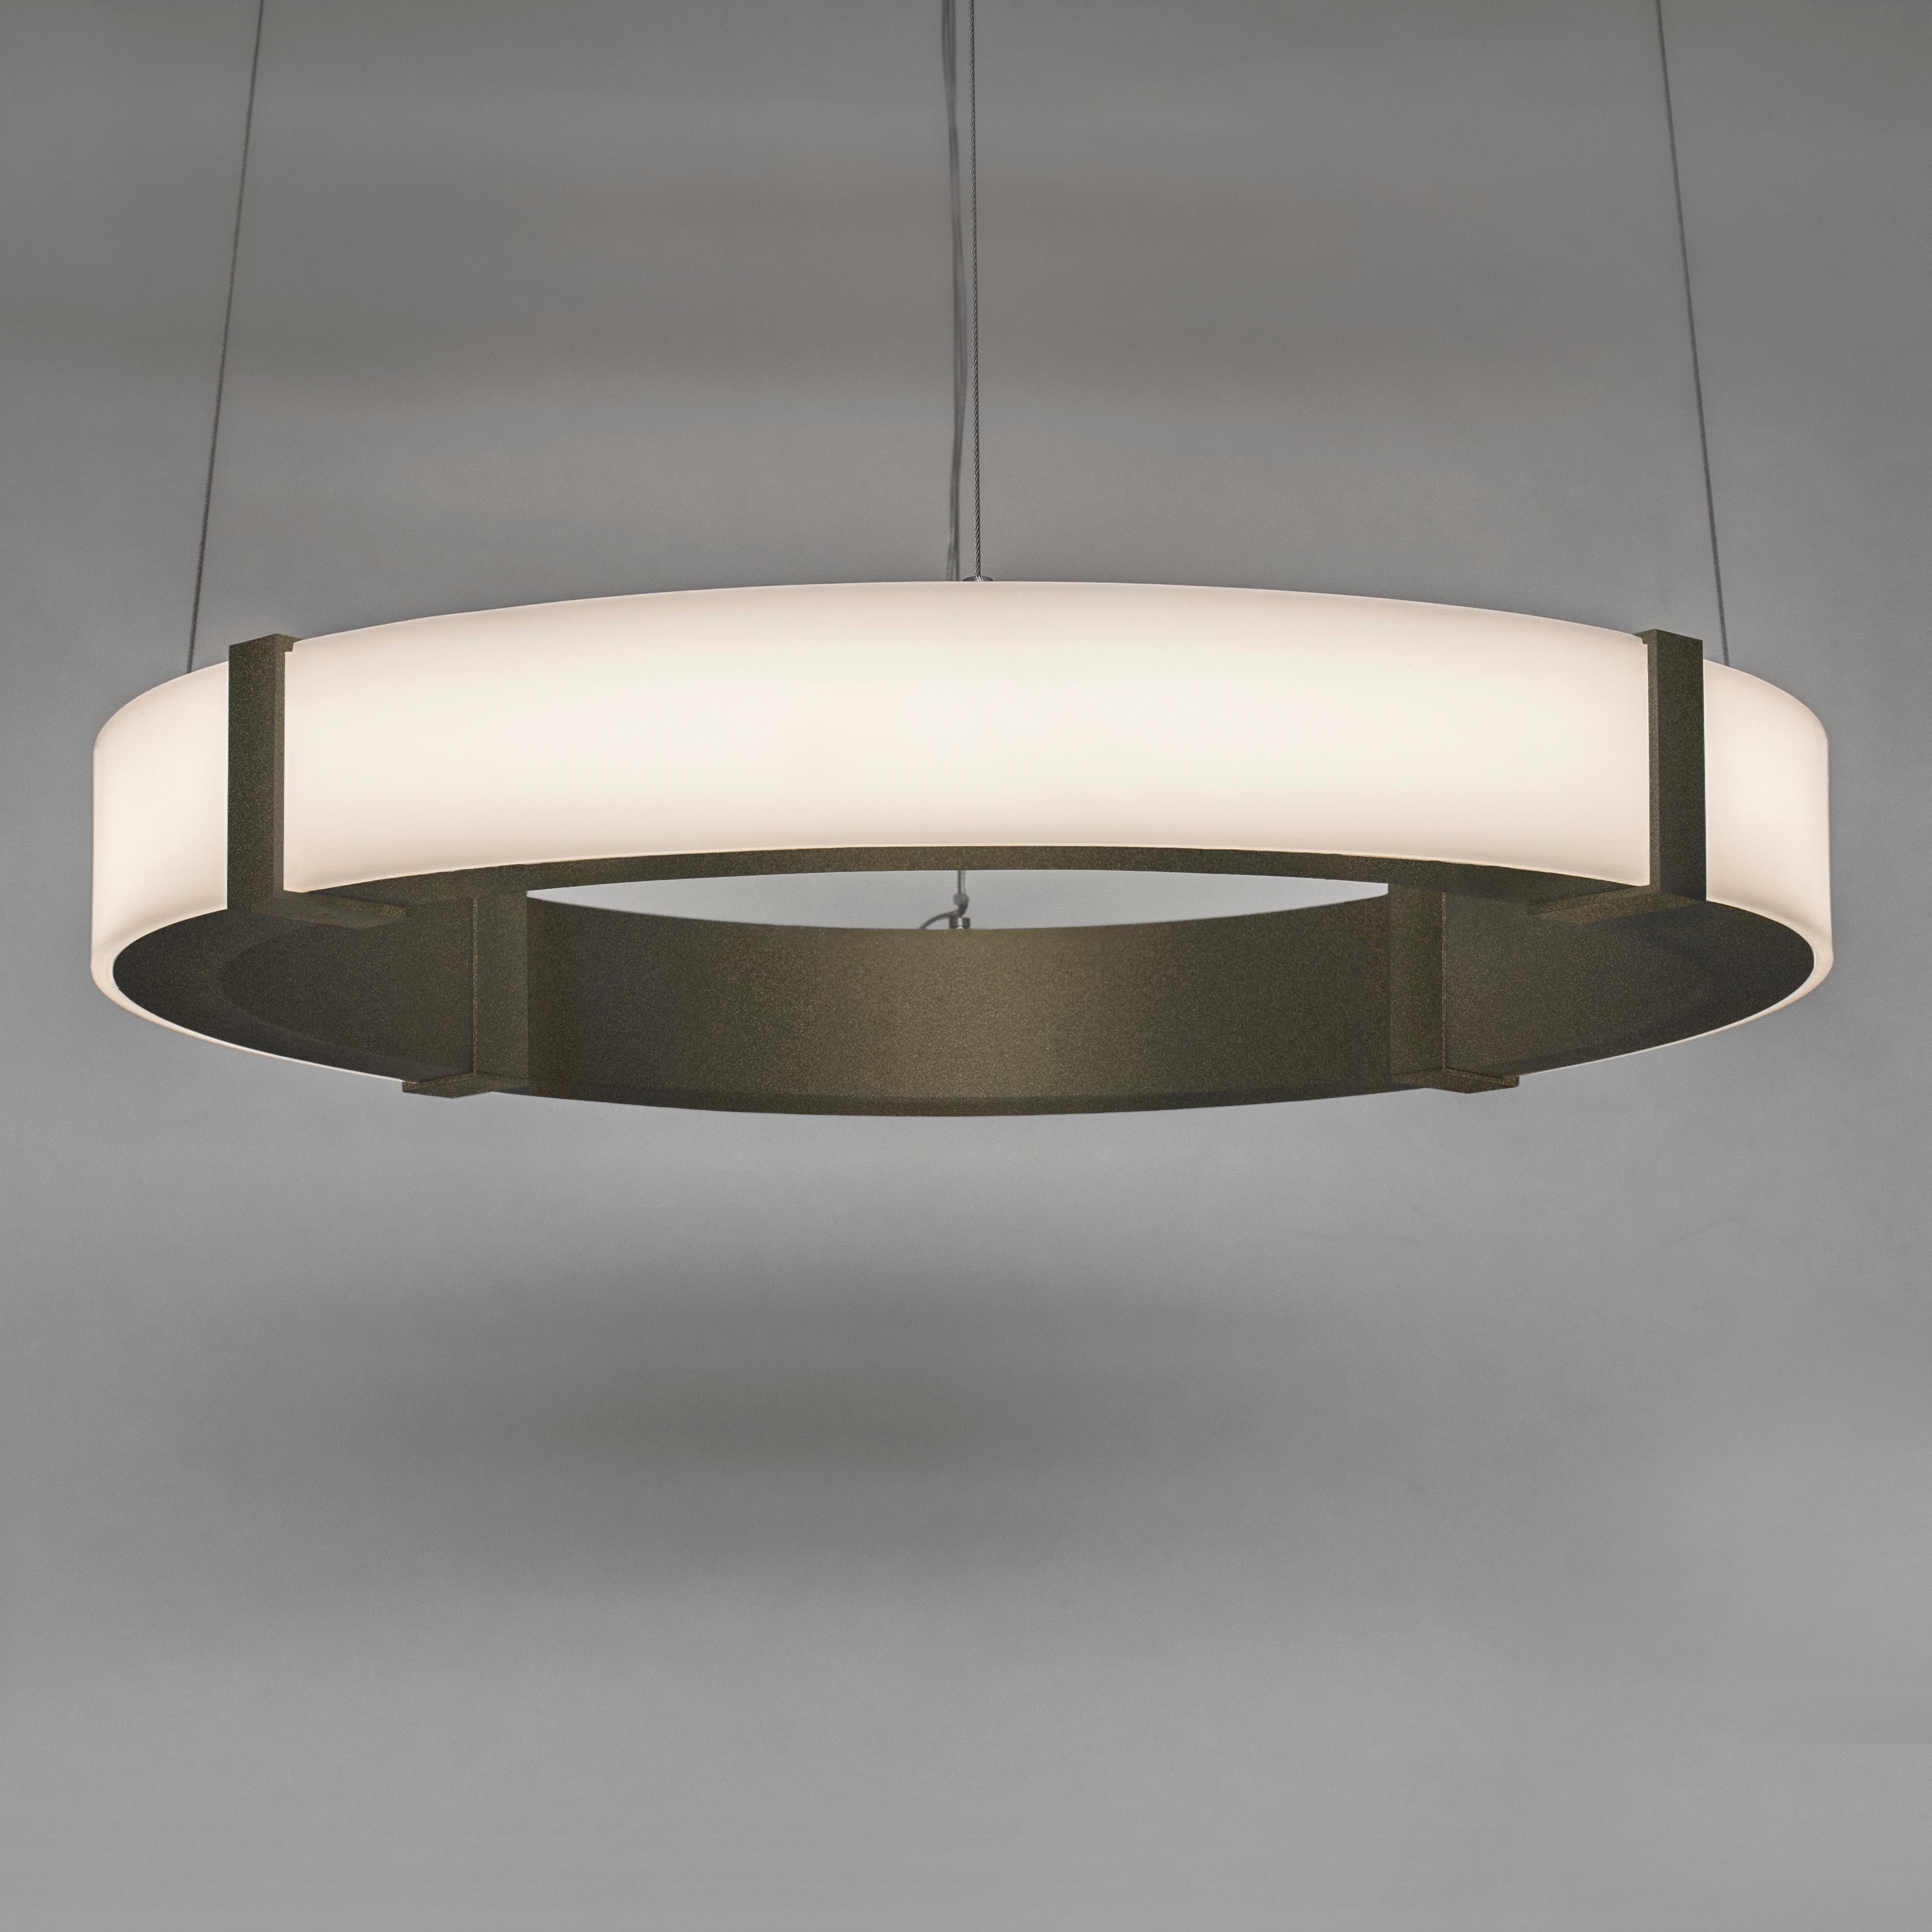 The Aura Alto Inverso pendant emits an elegant glow that is diffused by a minimal satin white acrylic outer ring. The inner ring is composed of cold-rolled steel and can be finished in plated or powder coat options. The Aura Alto Inverso Pendant